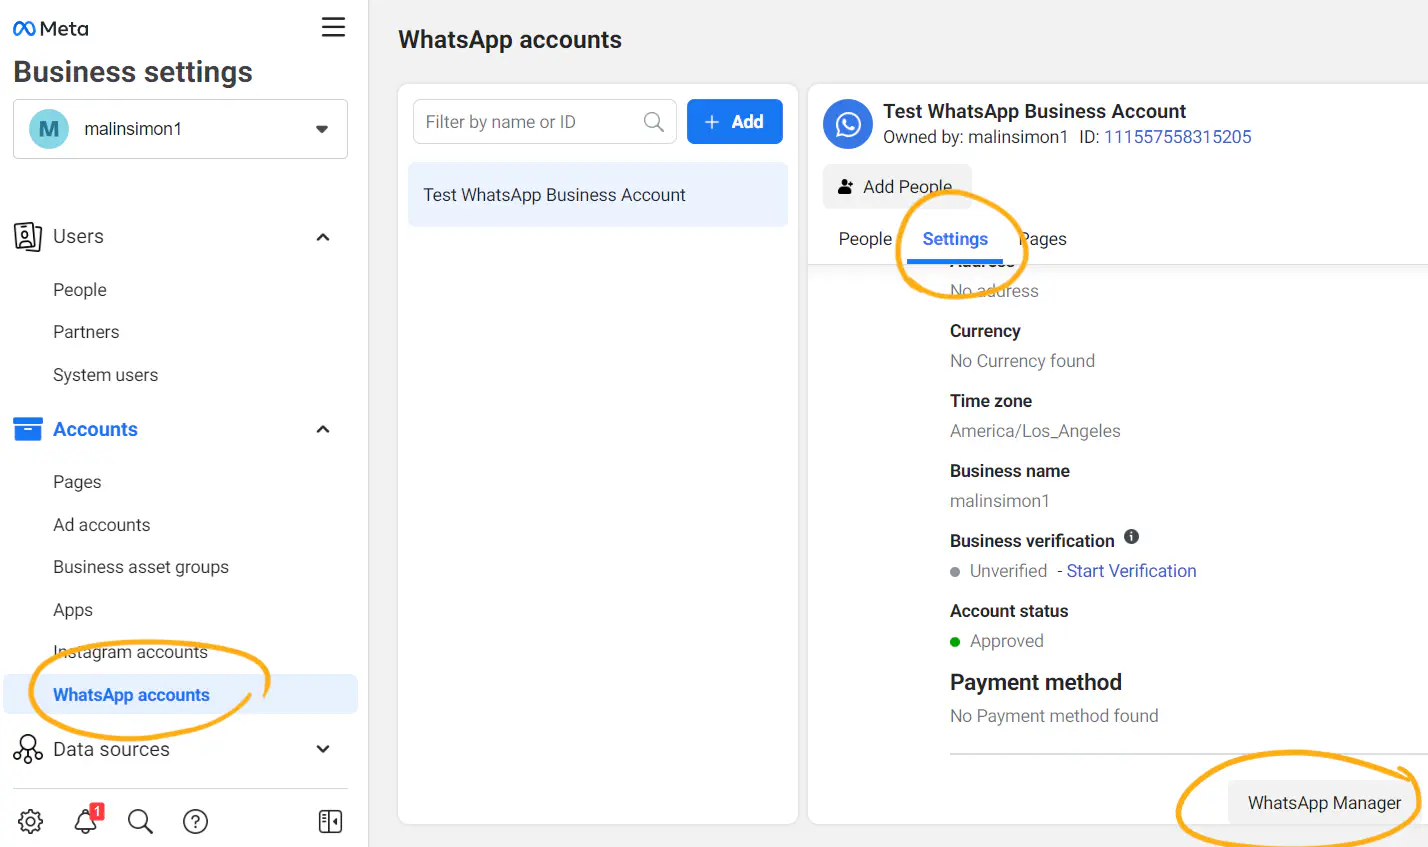 Accessing WhatsApp manager on Meta Business Suite dashboard